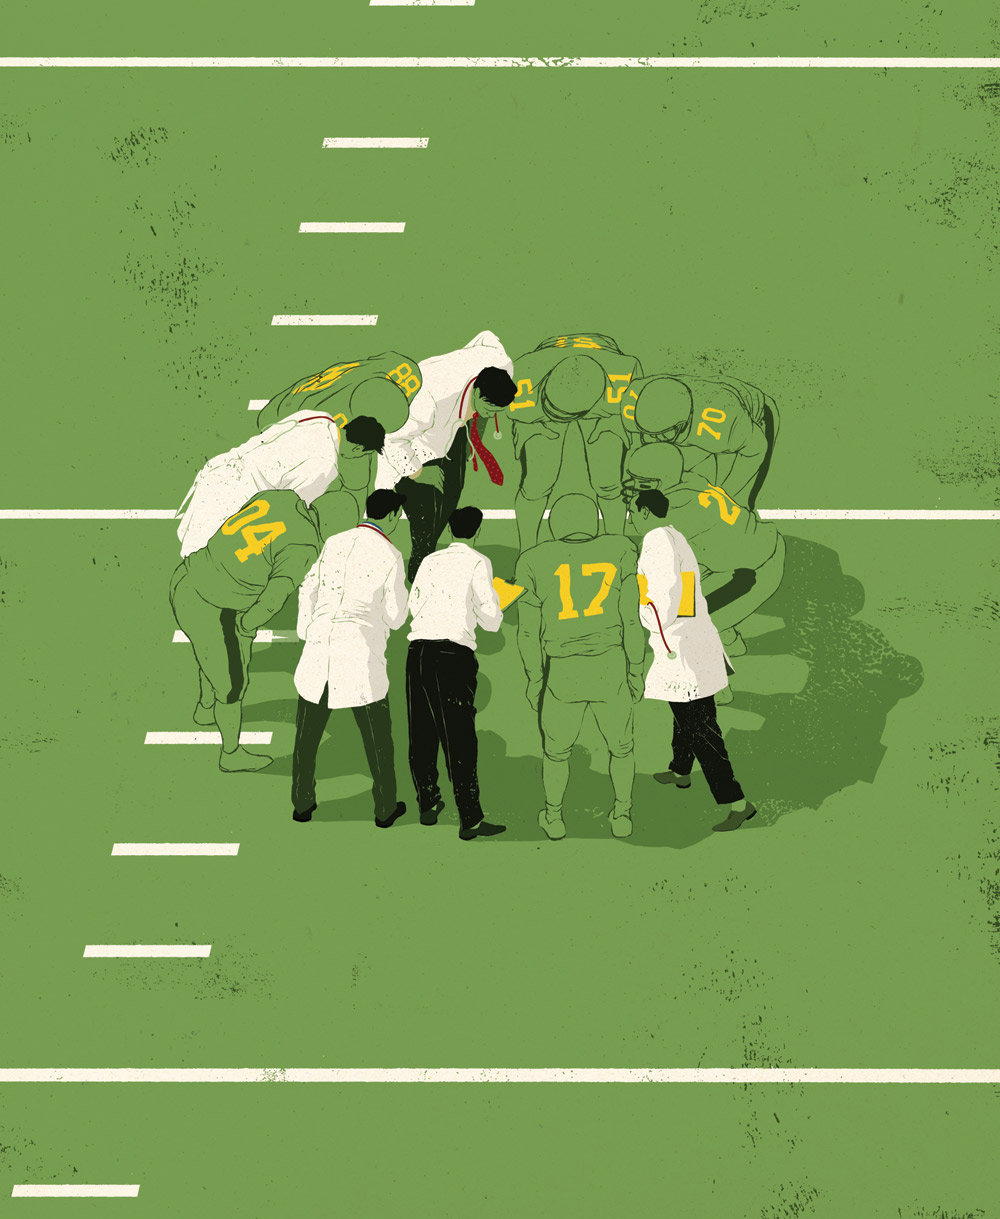 Illustration of football team and doctors in a huddle